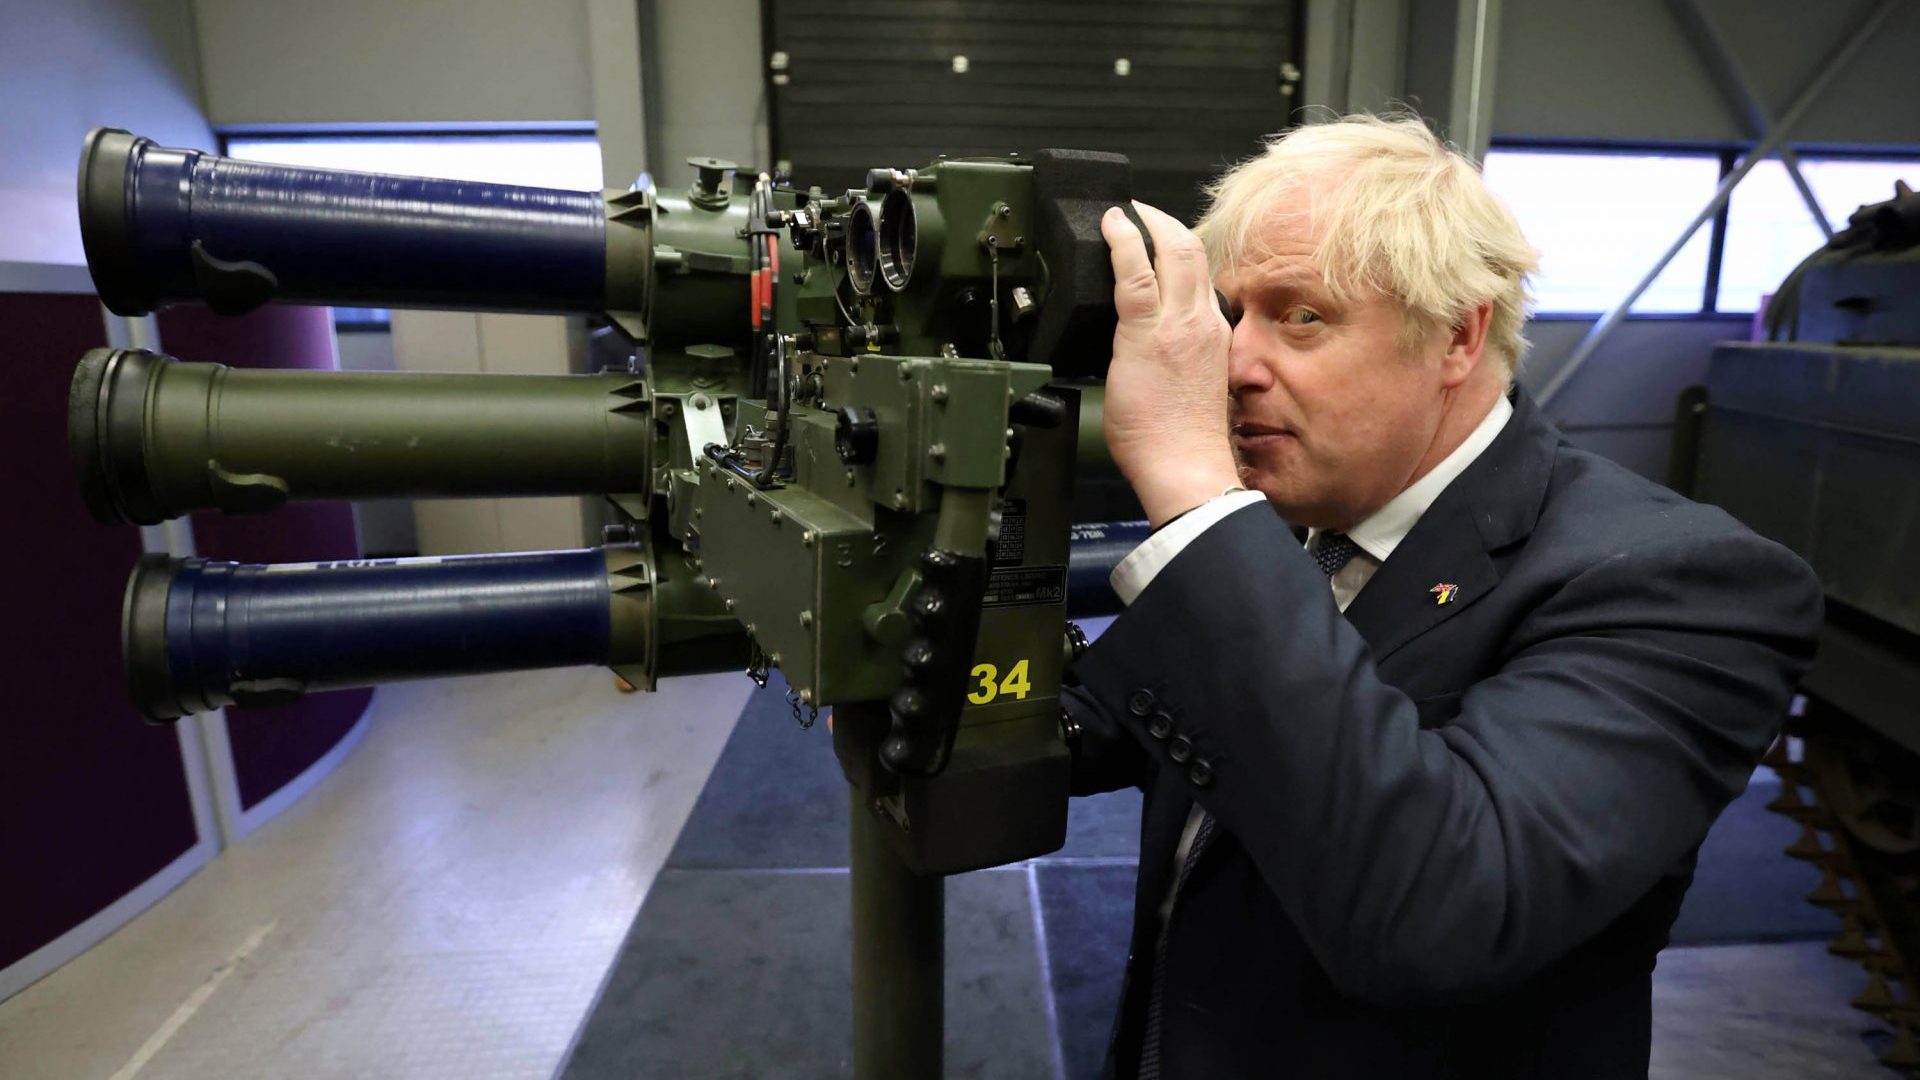 Down the barrel of a gun: Boris Johnson poses with shoulder-launch missile system during a visit to Northern Ireland. Photo: Liam McBurney/Getty